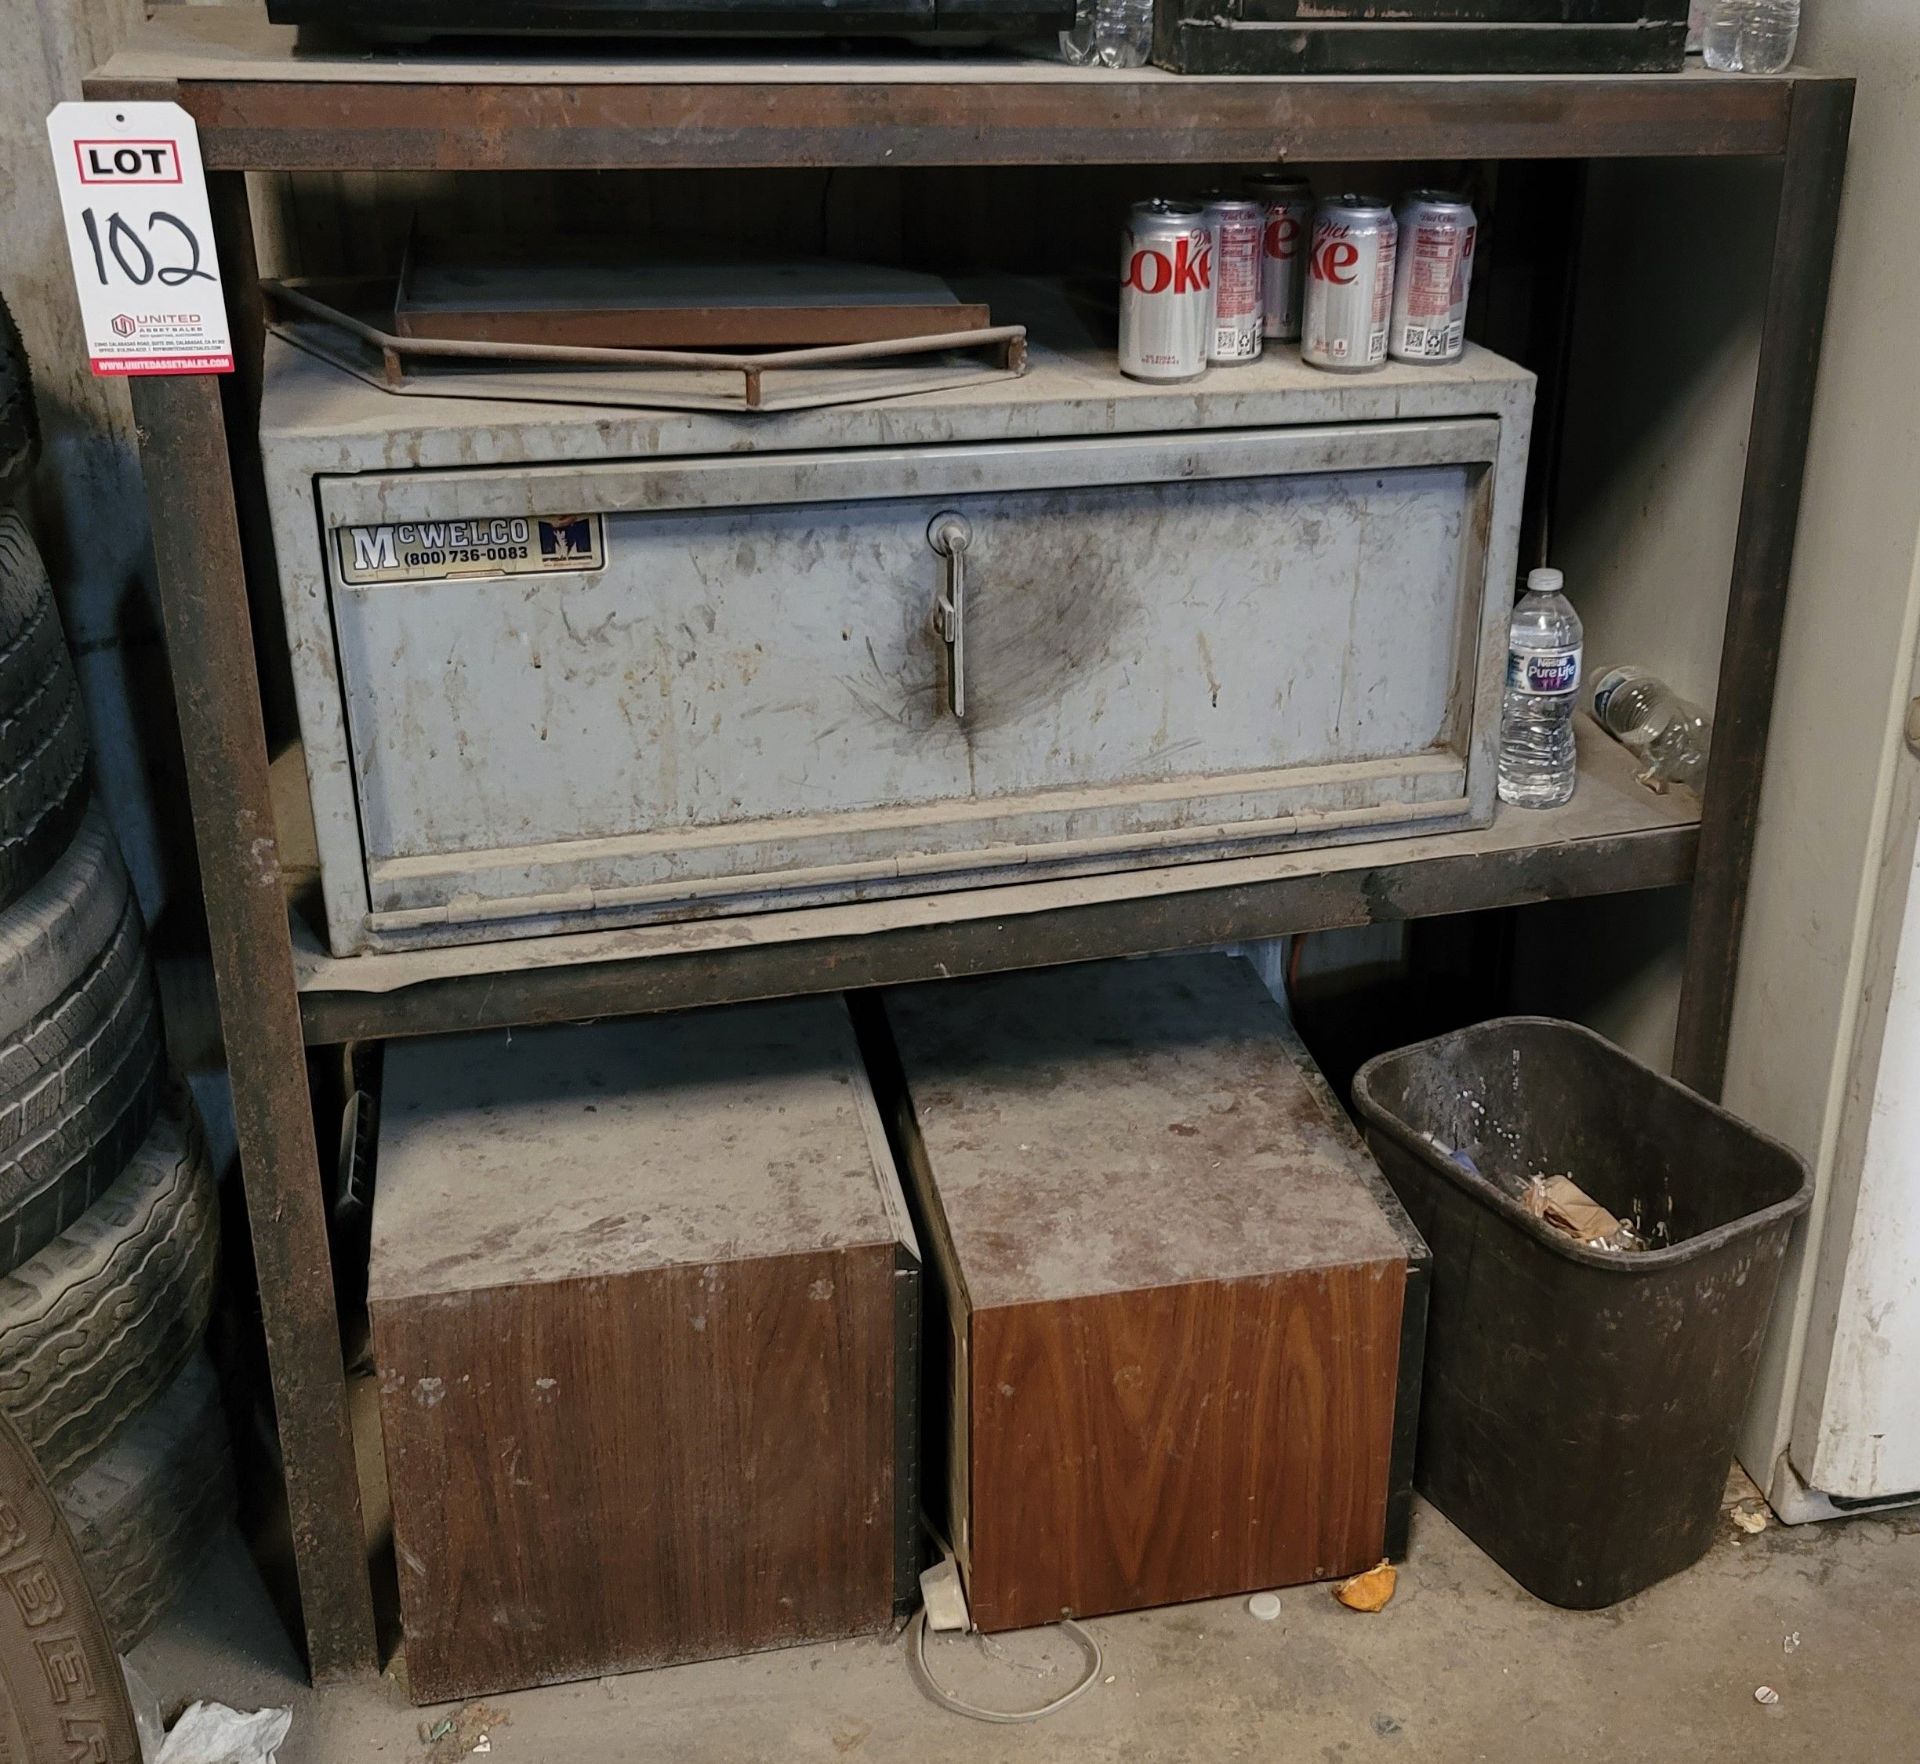 STEEL SHELF UNIT, 47" X 19-1/2" X 4' HT, CONTENTS NOT INCLUDED